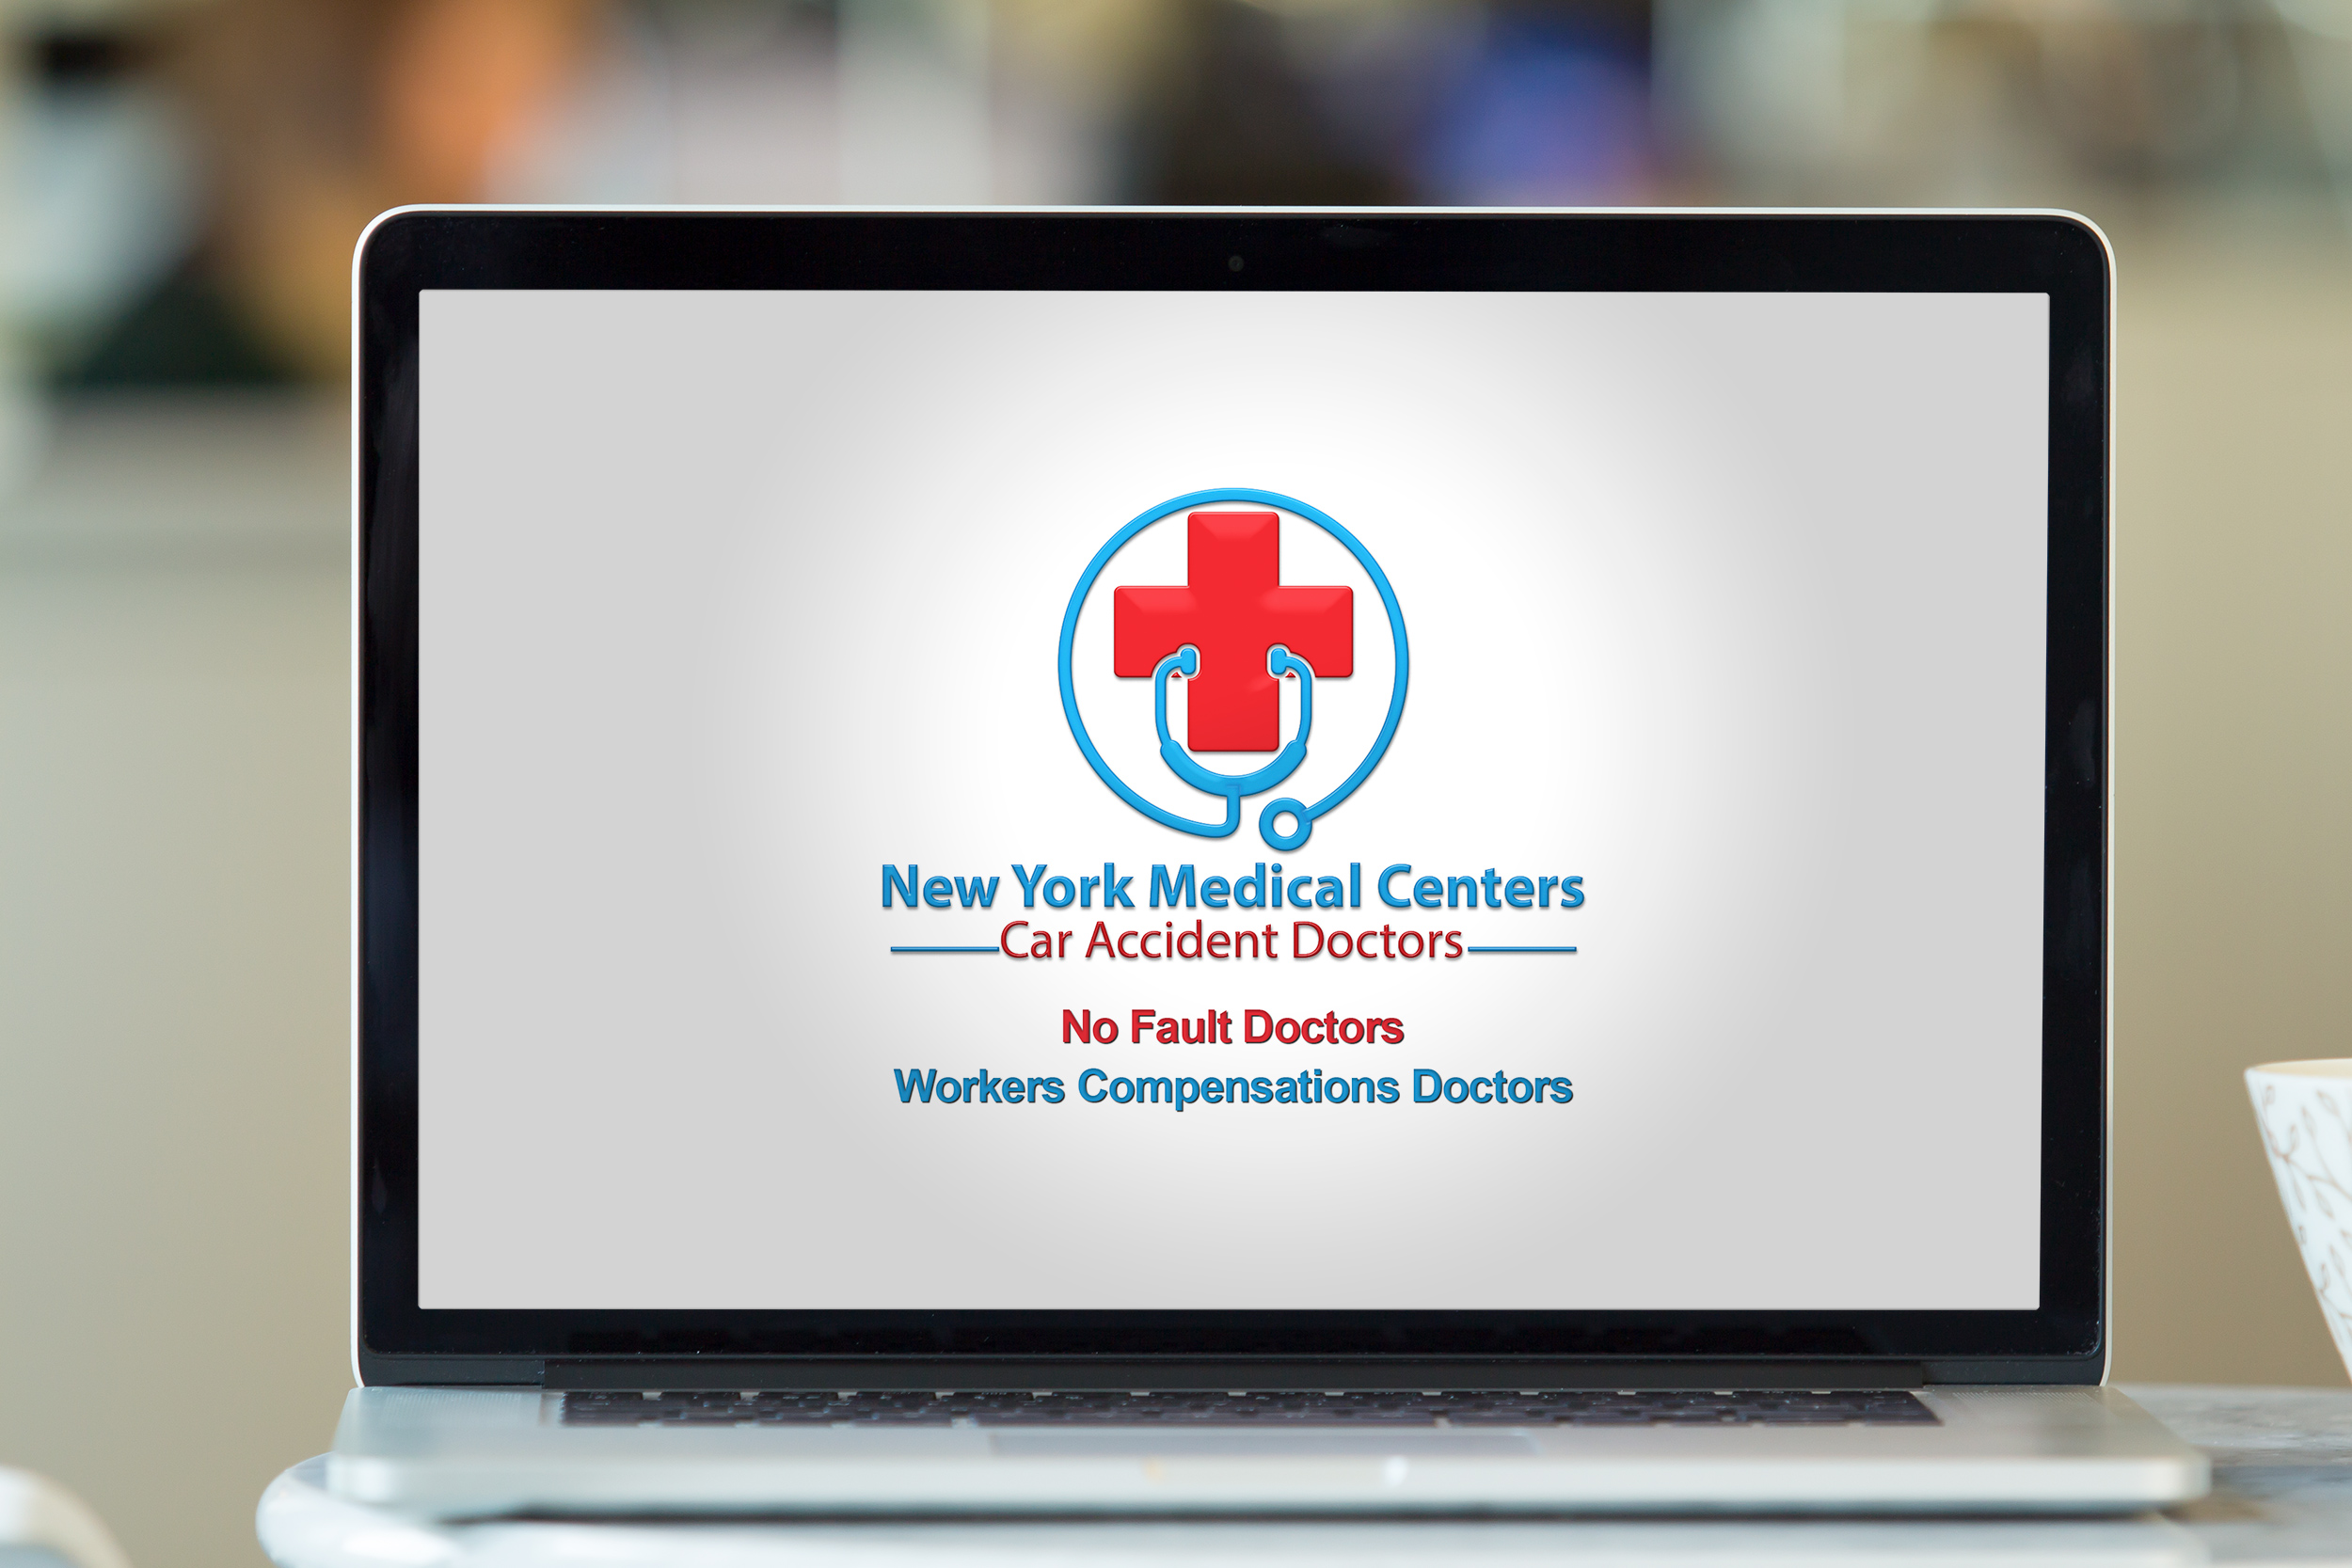 new york medical center - staten island no fault doctor - workers compensation doctor